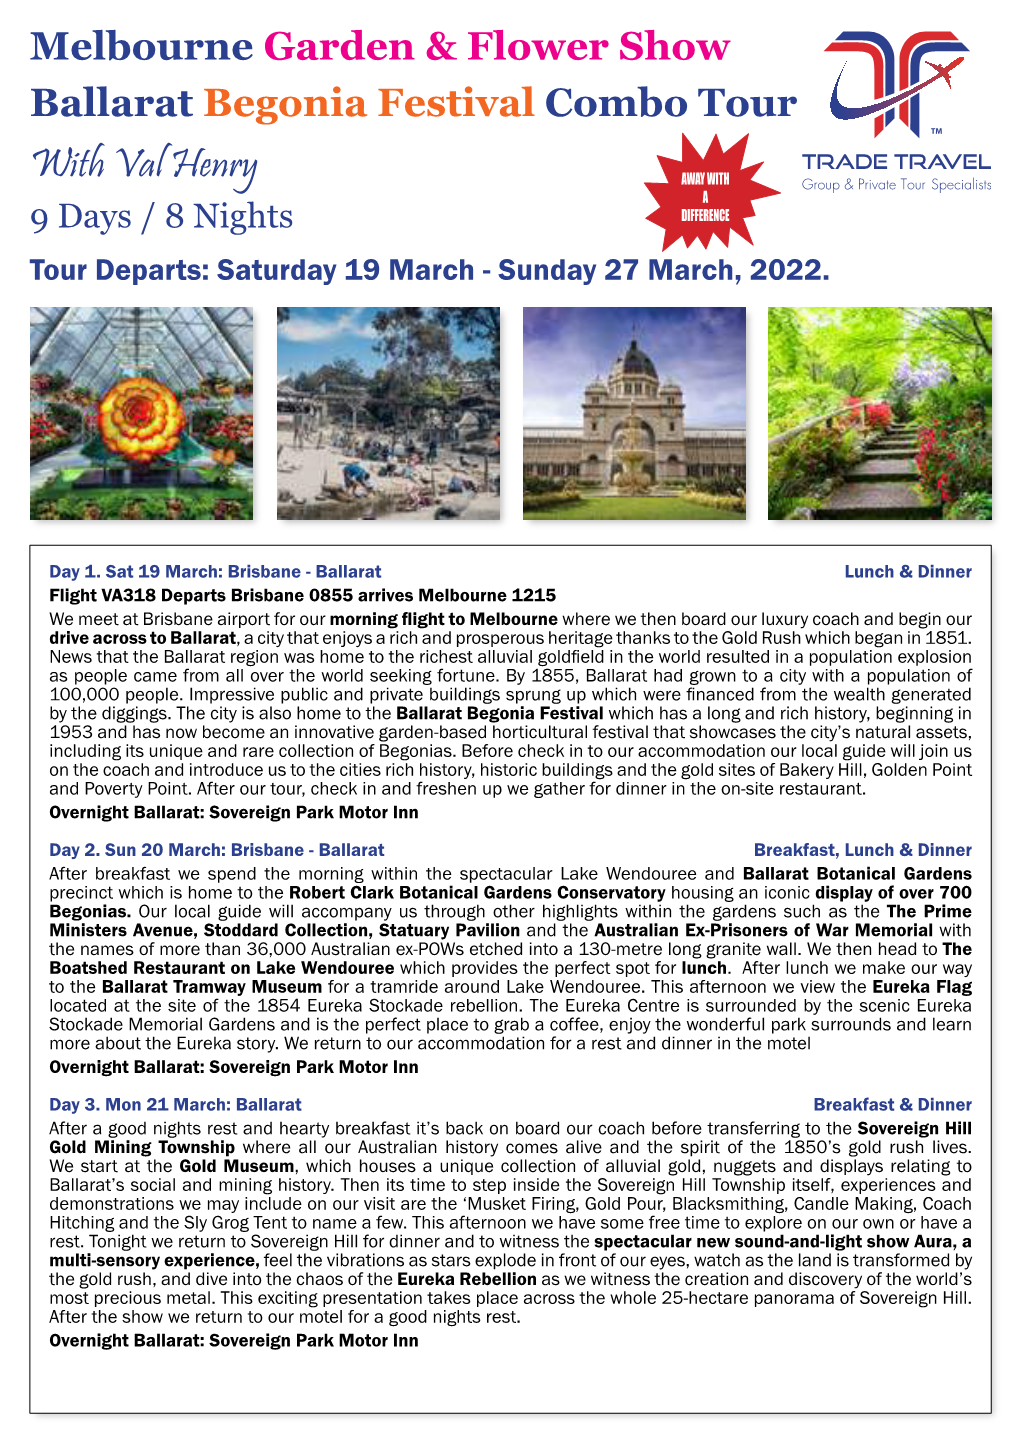 With Val Henry AWAY with a 9 Days / 8 Nights DIFFERENCE Tour Departs: Saturday 19 March - Sunday 27 March, 2022